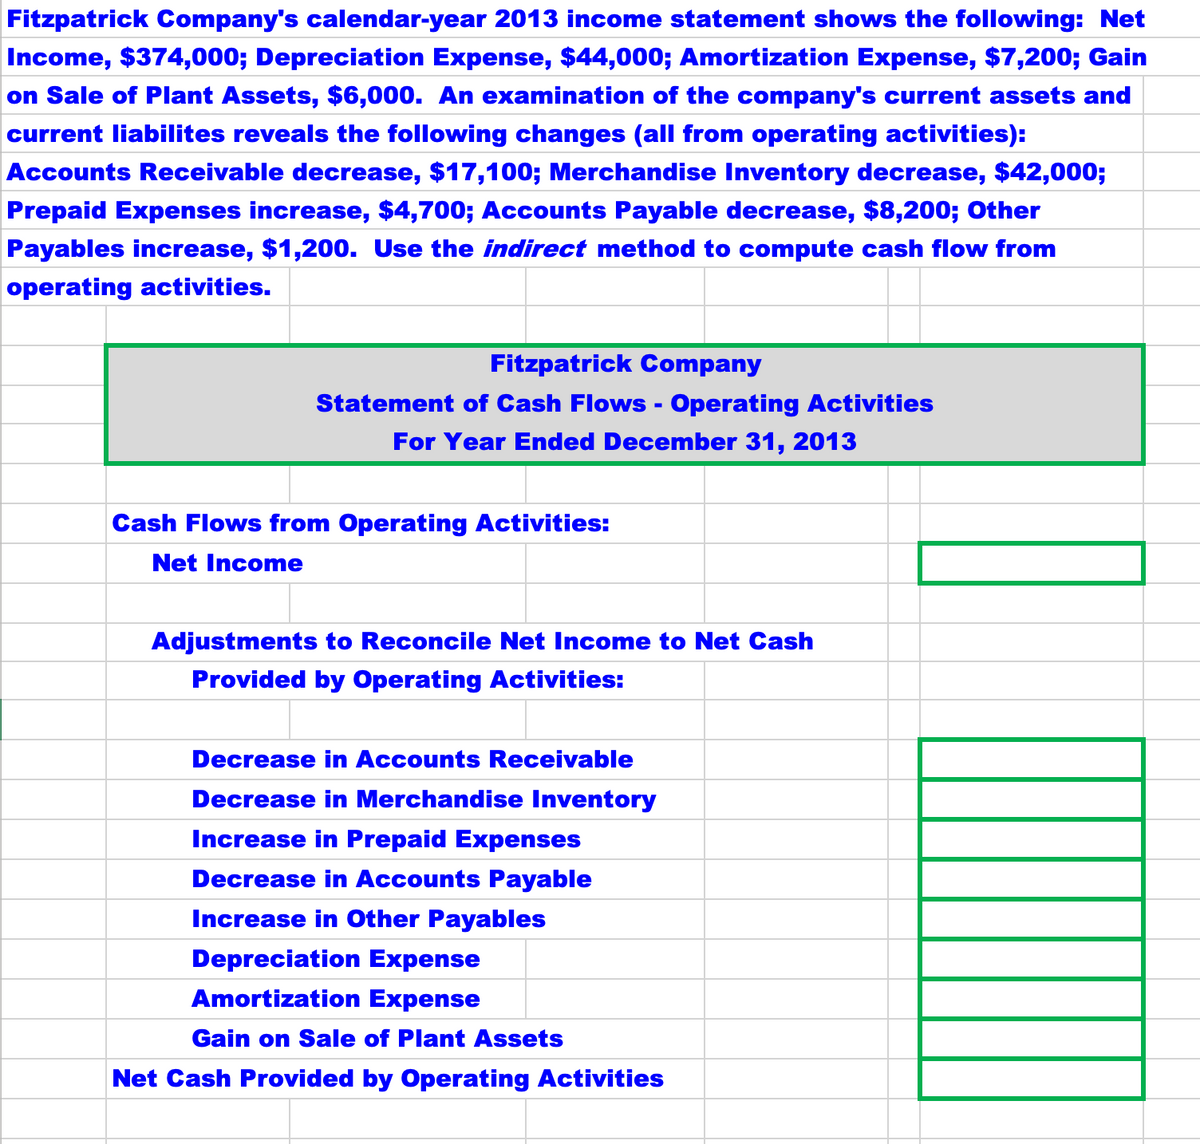 Fitzpatrick Company's calendar-year 2013 income statement shows the following: Net
Income, $374,000; Depreciation Expense, $44,000; Amortization Expense, $7,200; Gain
on Sale of Plant Assets, $6,000. An examination of the company's current assets and
current liabilites reveals the following changes (all from operating activities):
Accounts Receivable decrease, $17,100; Merchandise Inventory decrease, $42,000;
Prepaid Expenses increase, $4,700; Accounts Payable decrease, $8,200; Other
Payables increase, $1,200. Use the indirect method to compute cash flow from
operating activities.
Fitzpatrick Company
Statement of Cash Flows - Operating Activities
For Year Ended December 31, 2013
Cash Flows from Operating Activities:
Net Income
Adjustments to Reconcile Net Income to Net Cash
Provided by Operating Activities:
Decrease in Accounts Receivable
Decrease in Merchandise Inventory
Increase in Prepaid Expenses
Decrease in Accounts Payable
Increase in Other Payables
Depreciation Expense
Amortization Expense
Gain on Sale of Plant Assets
Net Cash Provided by Operating Activities